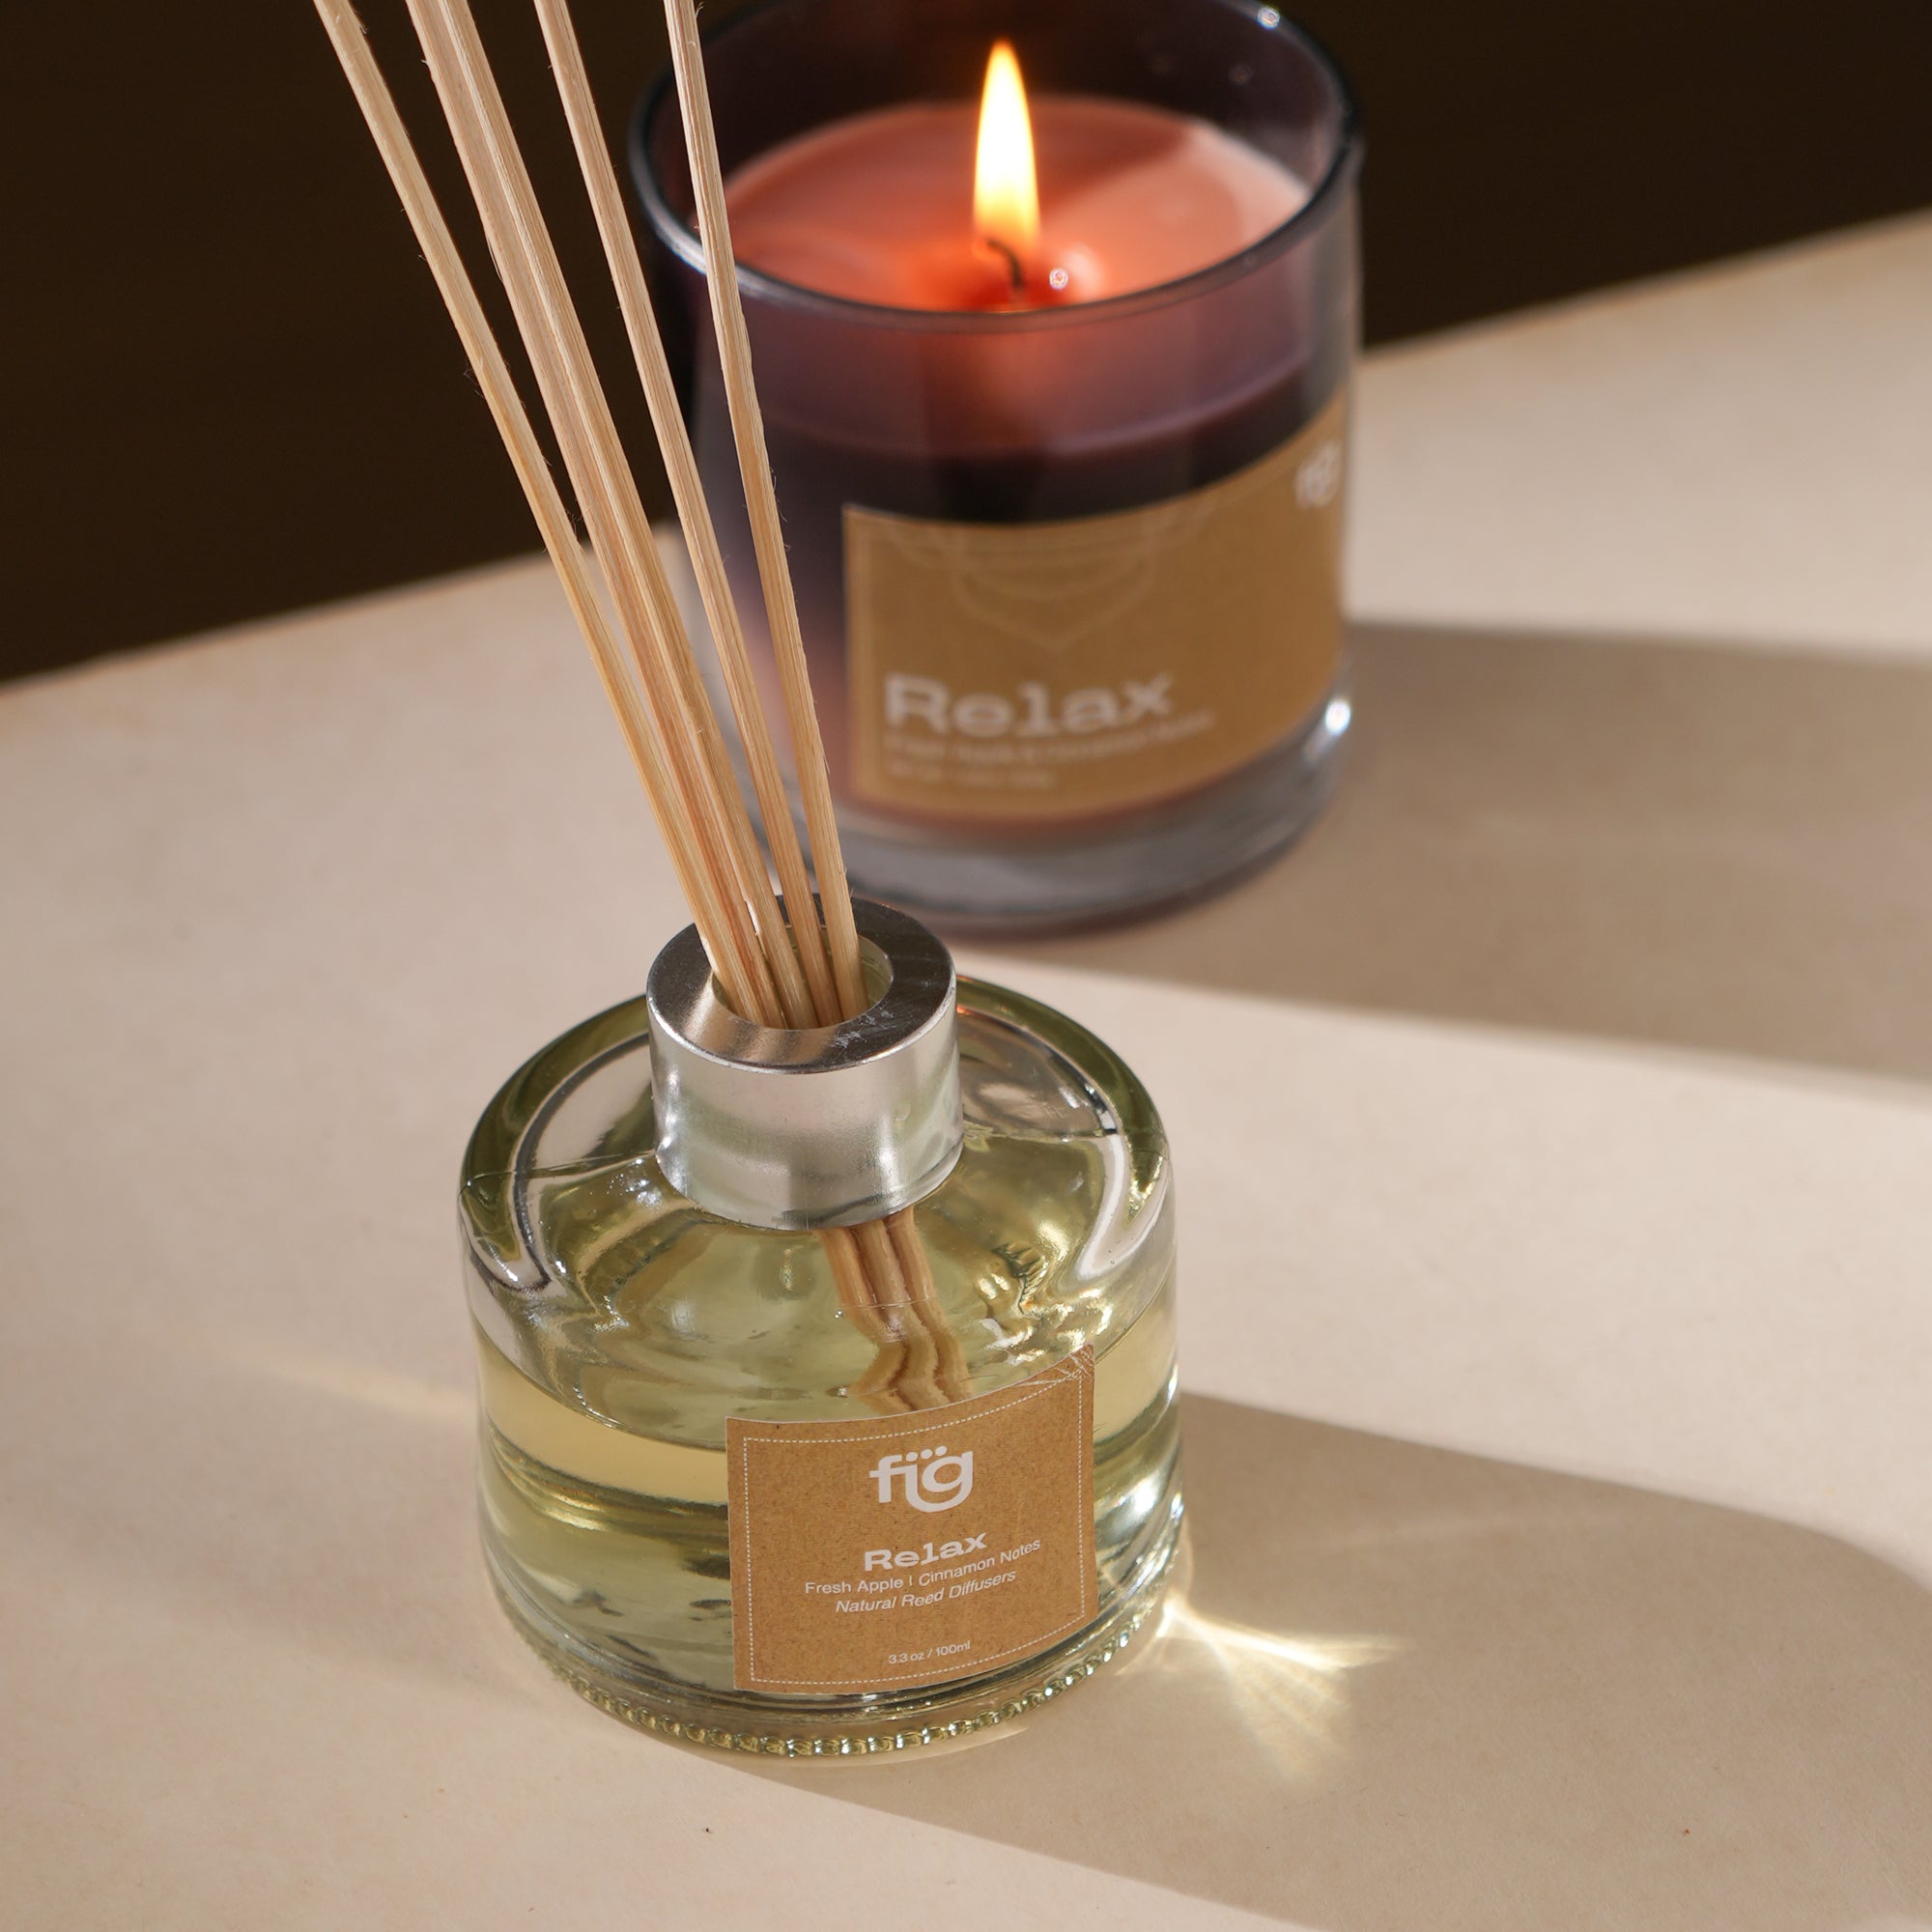 Relax Apple and Cinamon Reed Diffusor - IFRA standard Perfumes Scented Candle